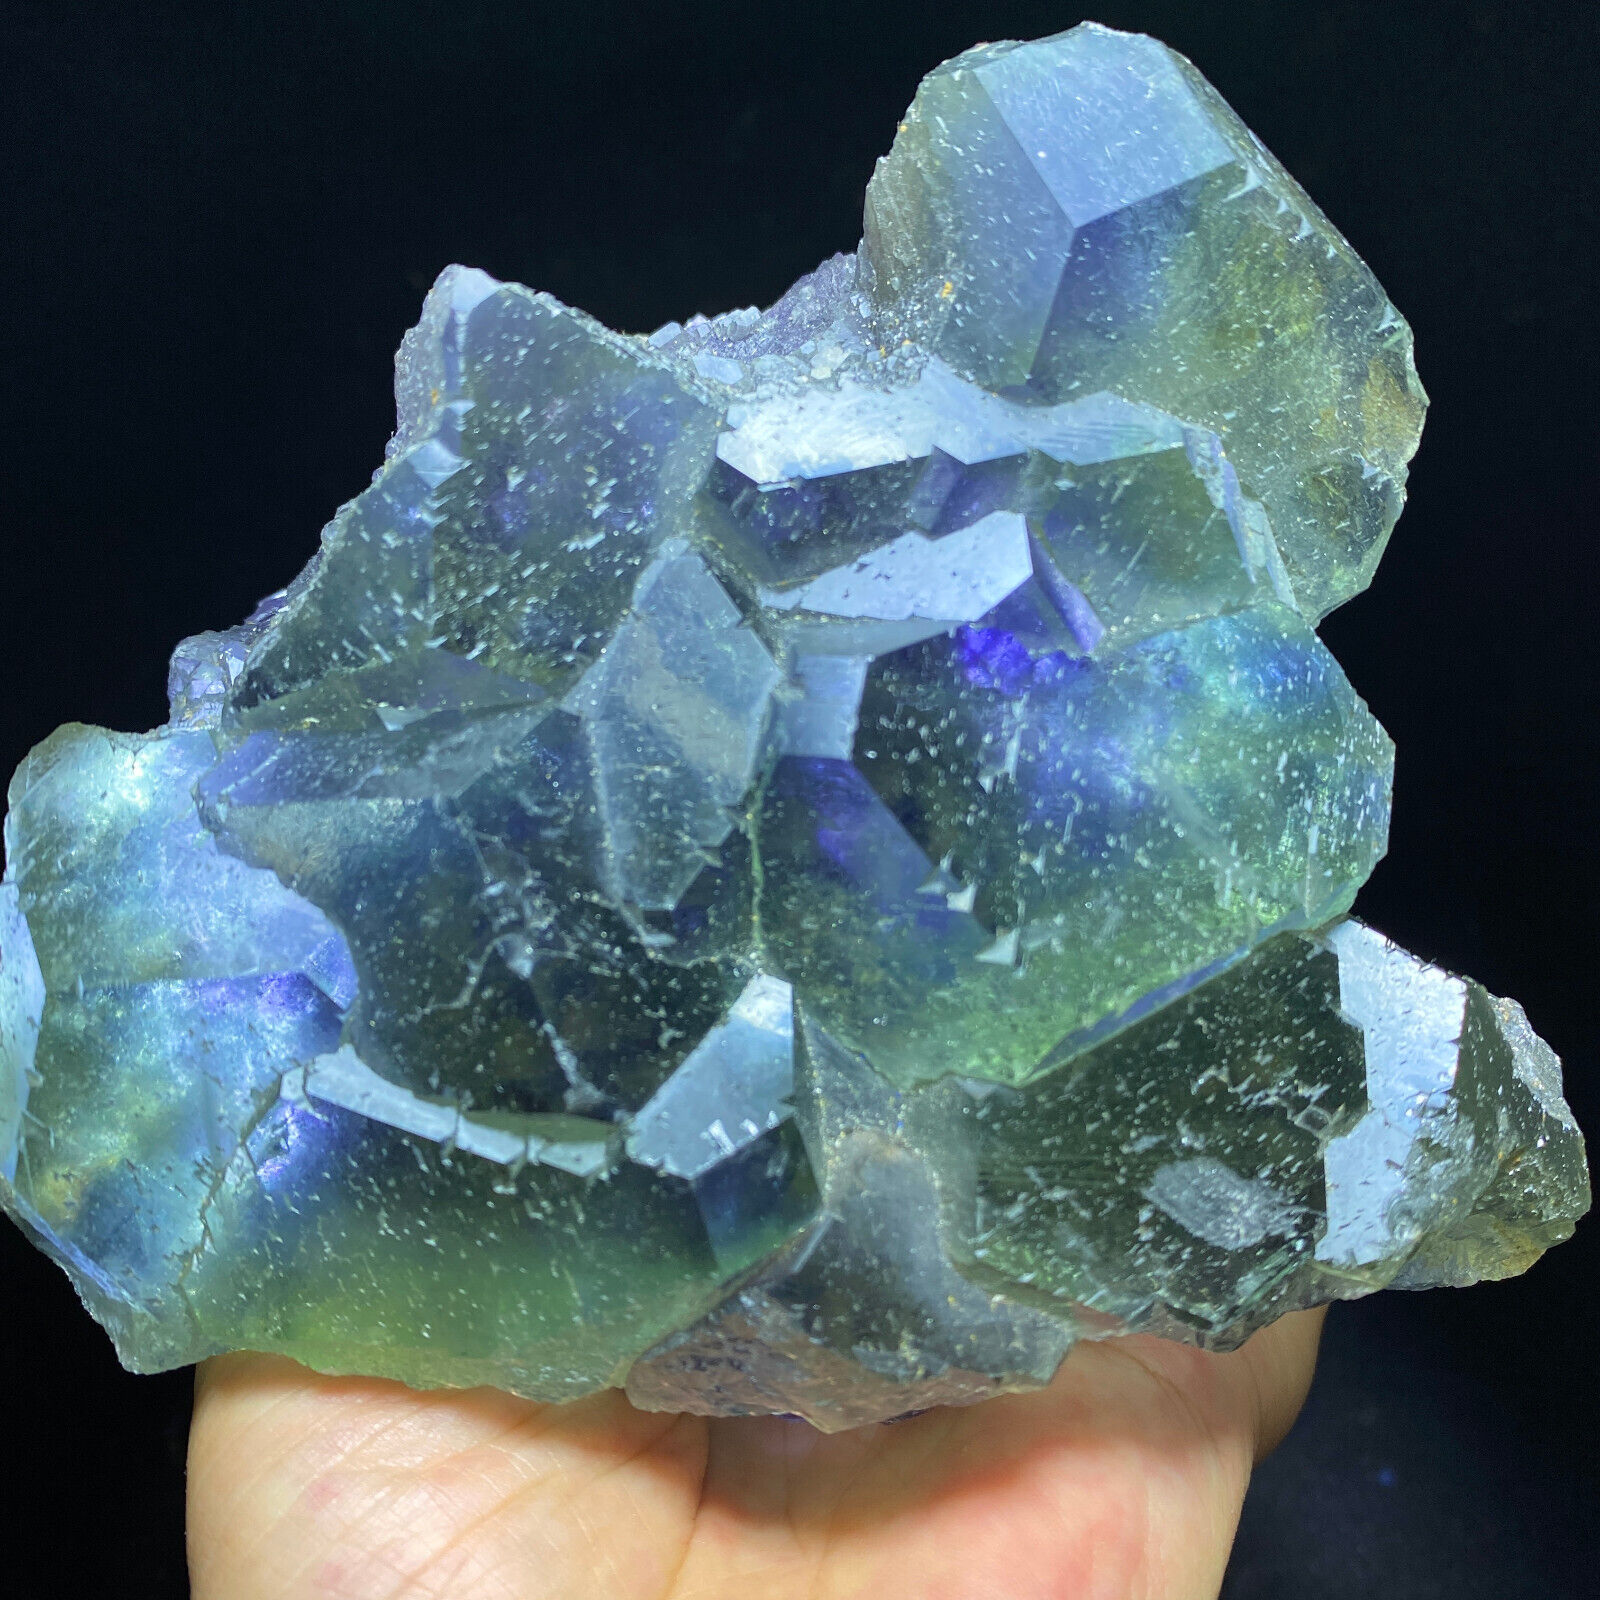 1305g  Large Particles Beauty Green Blue Fluorite Crystal Mineral Specimen/China